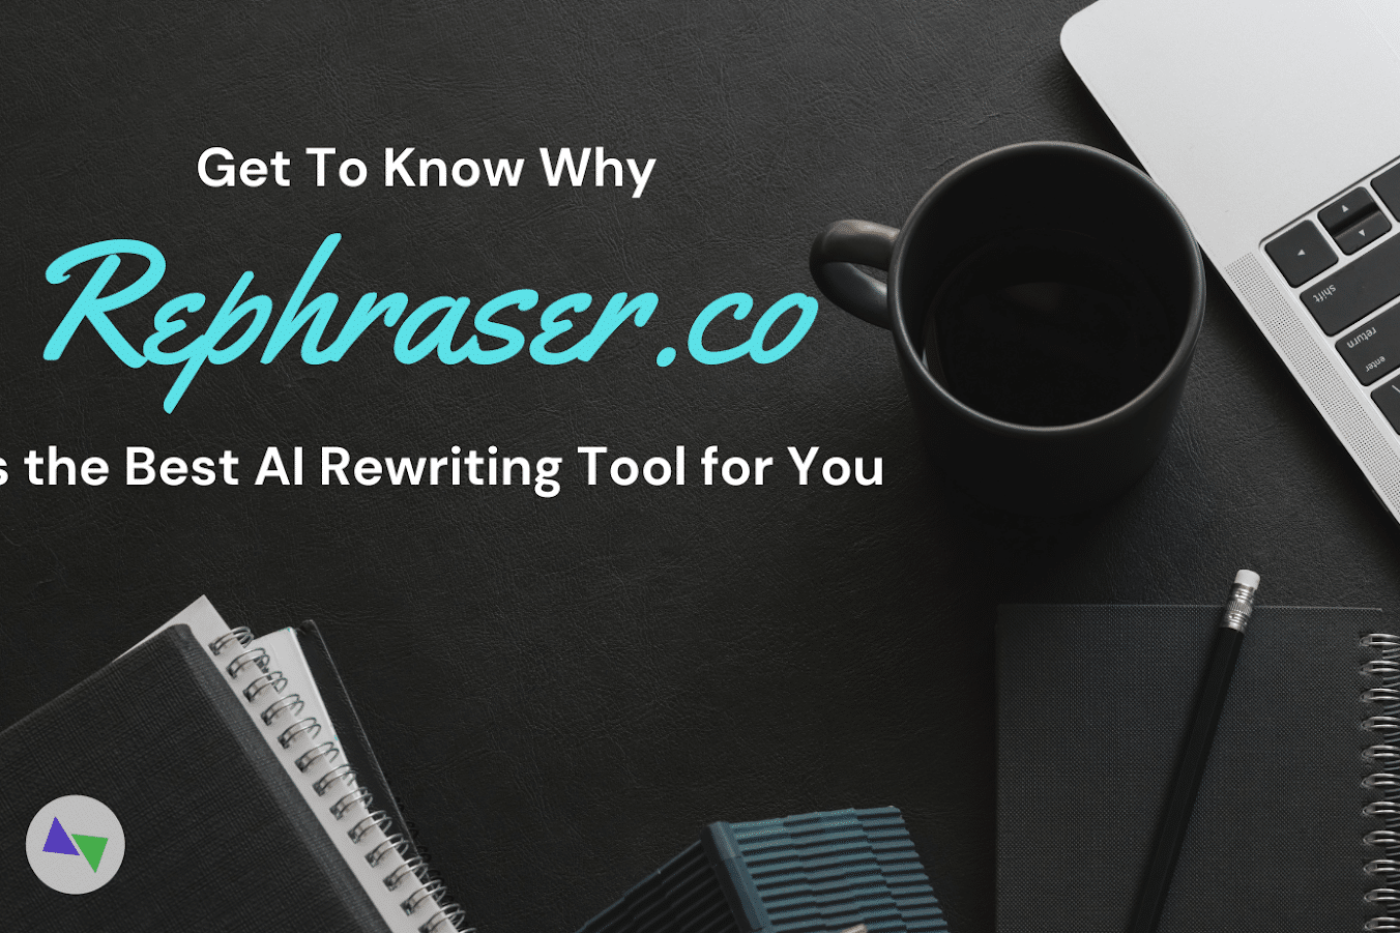 Get To Know Why Rephraser.co Is the Best